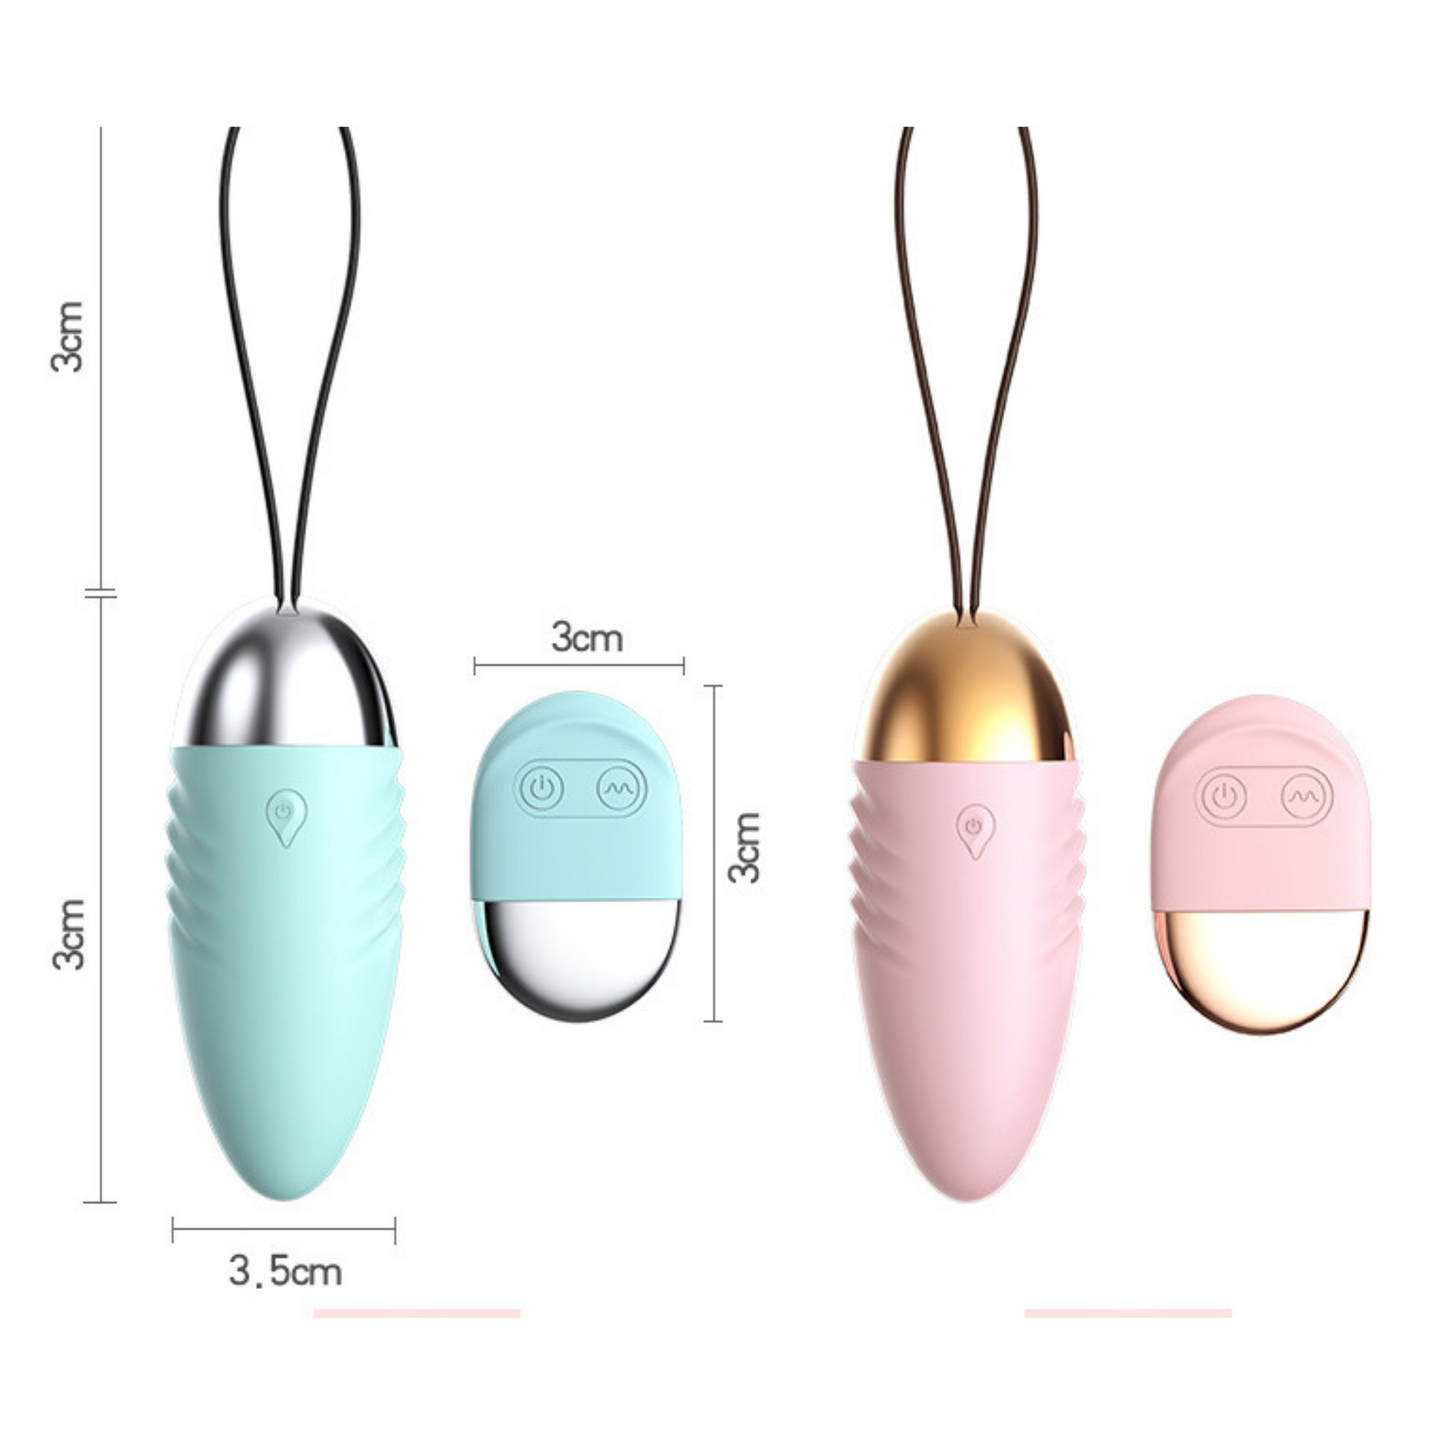 10 Modes Wireless Vibrating Egg with Remote Control